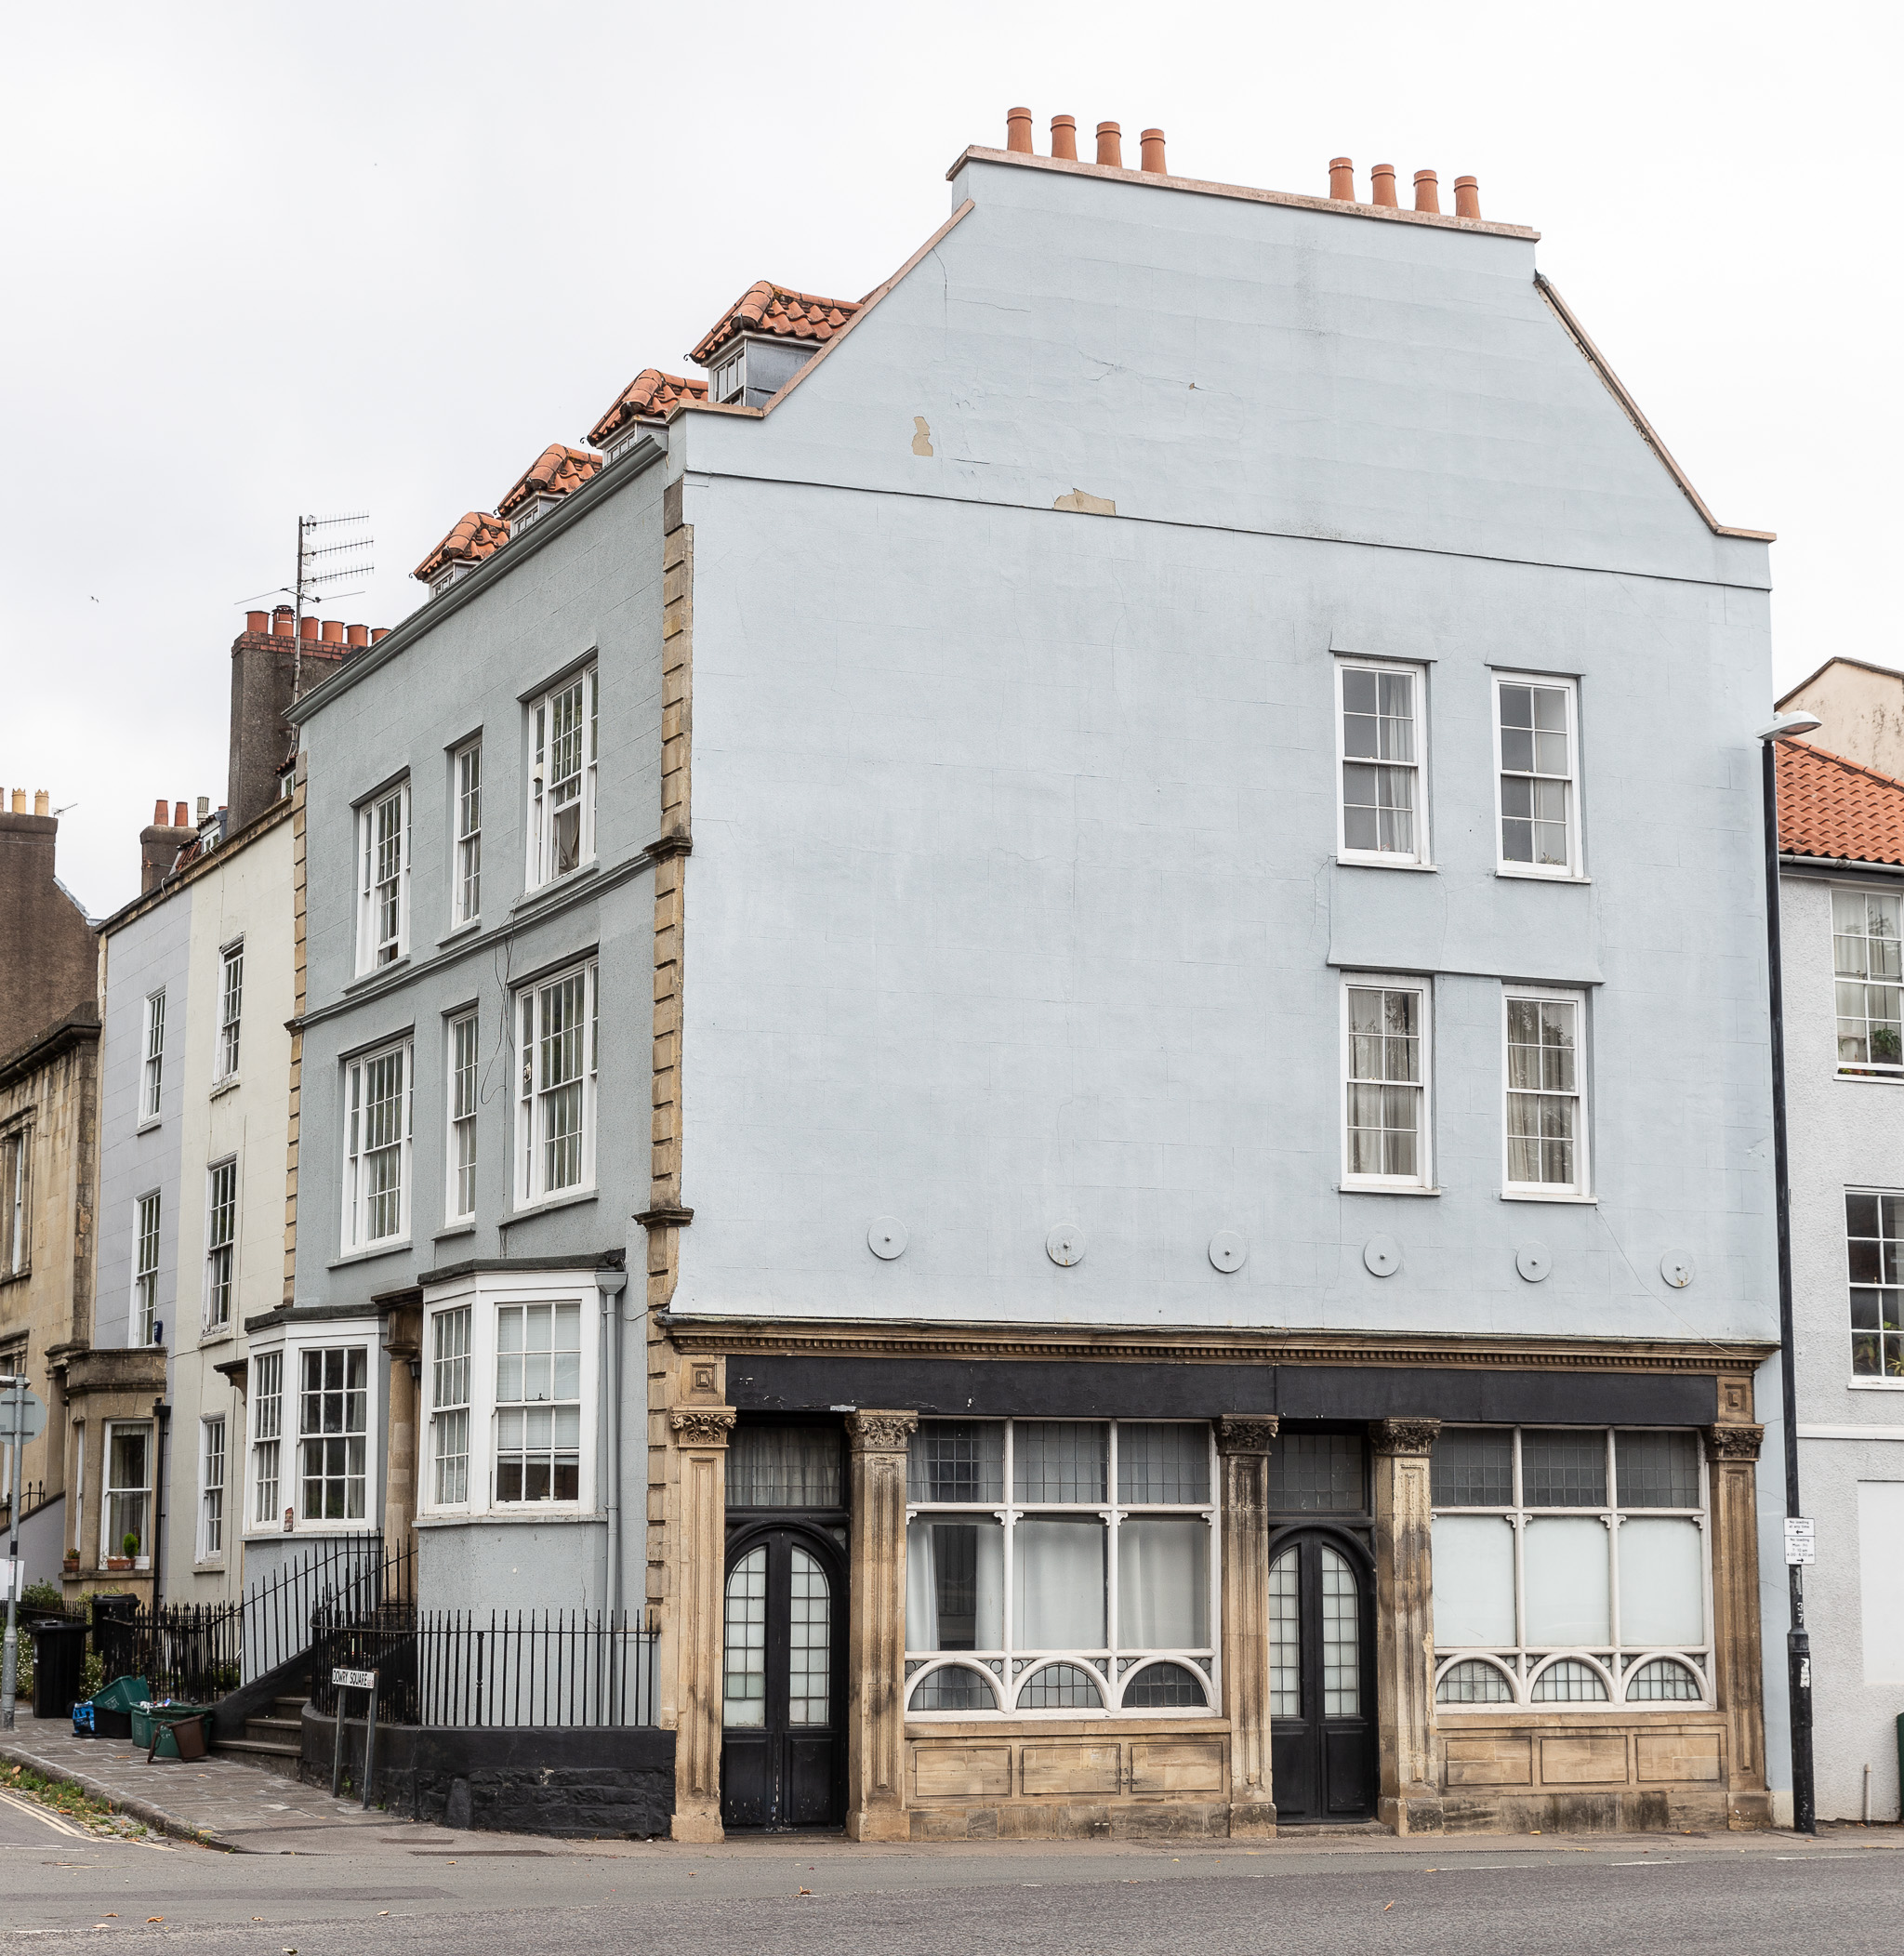 The Whole Shebang
Nowadays known as York House, and apparently offices, this was originally built by George Tully, like a lot of the rest of the square.

According t...